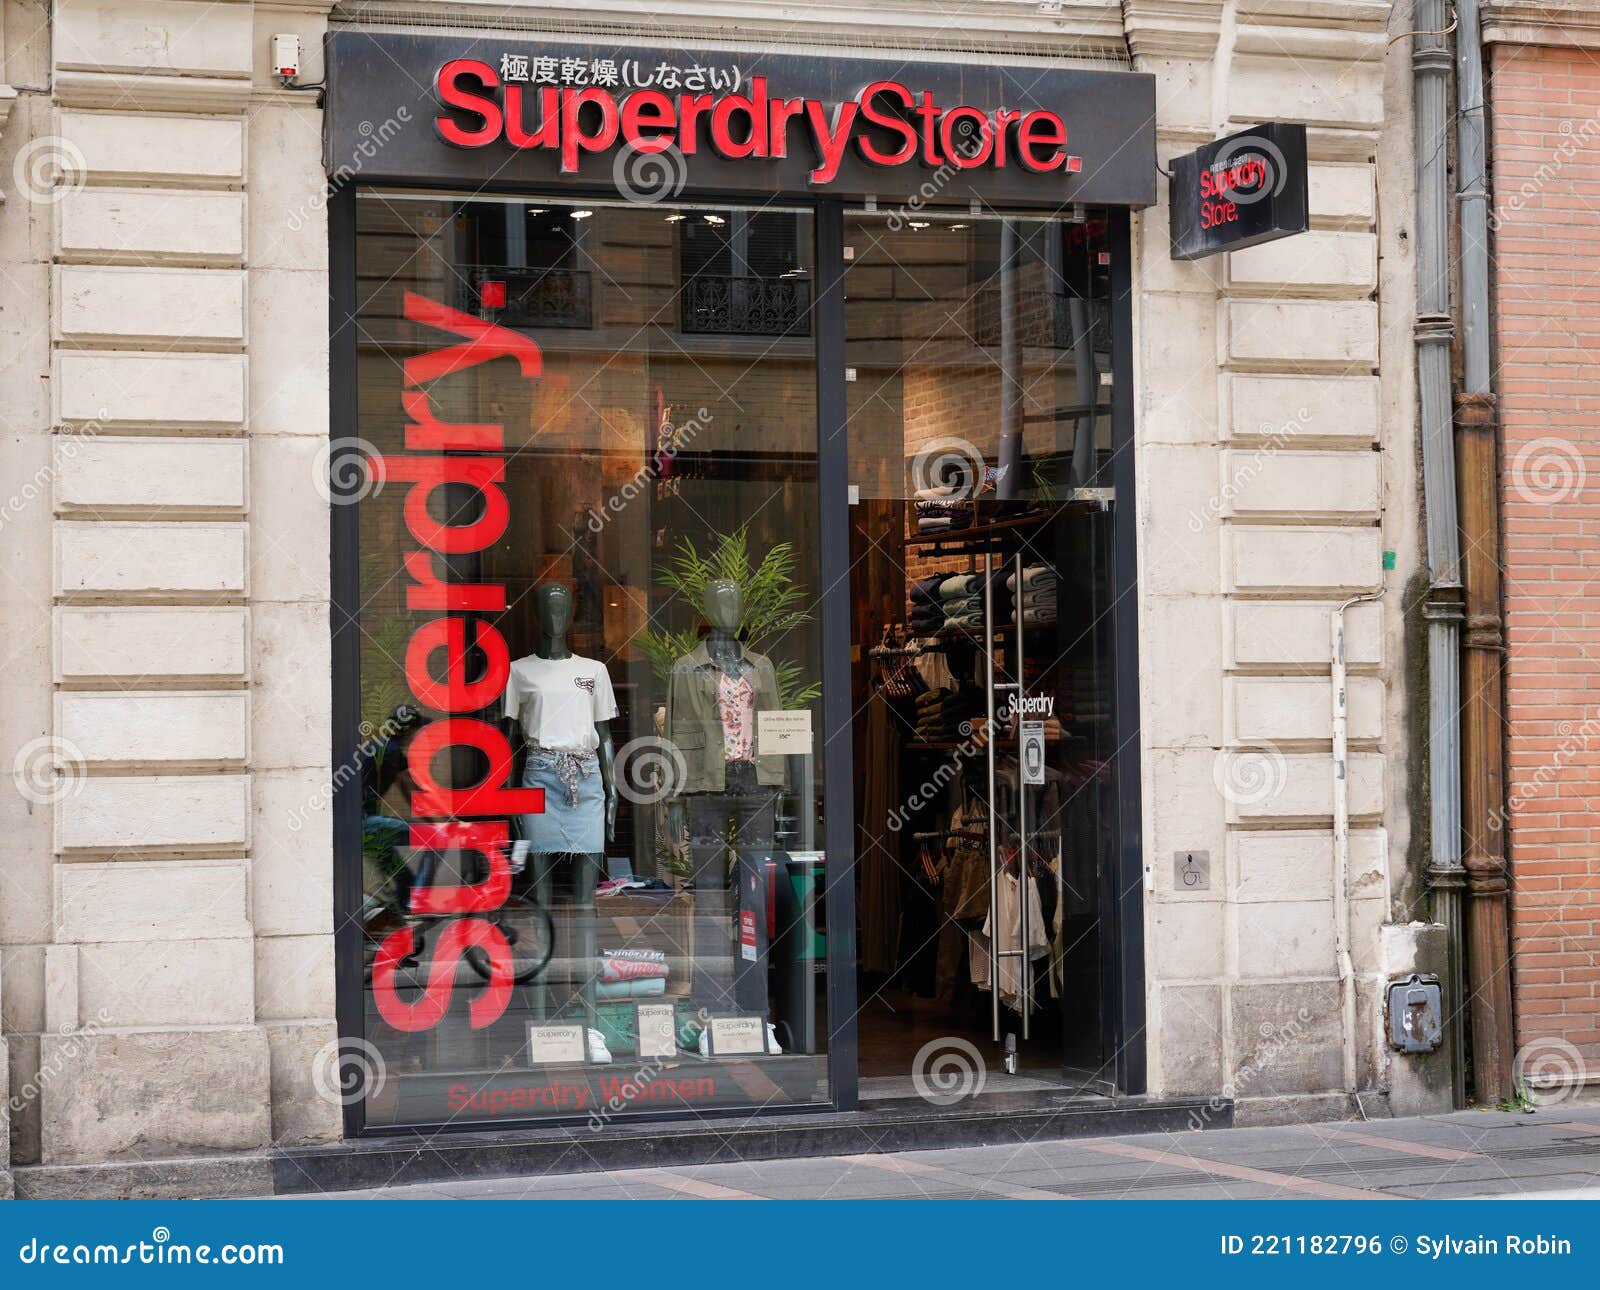 Superdry Logo Brand Fashion Shop and Text Sign Store on Facade Boutique UK  Branded Editorial Photo - Image of design, business: 221182796